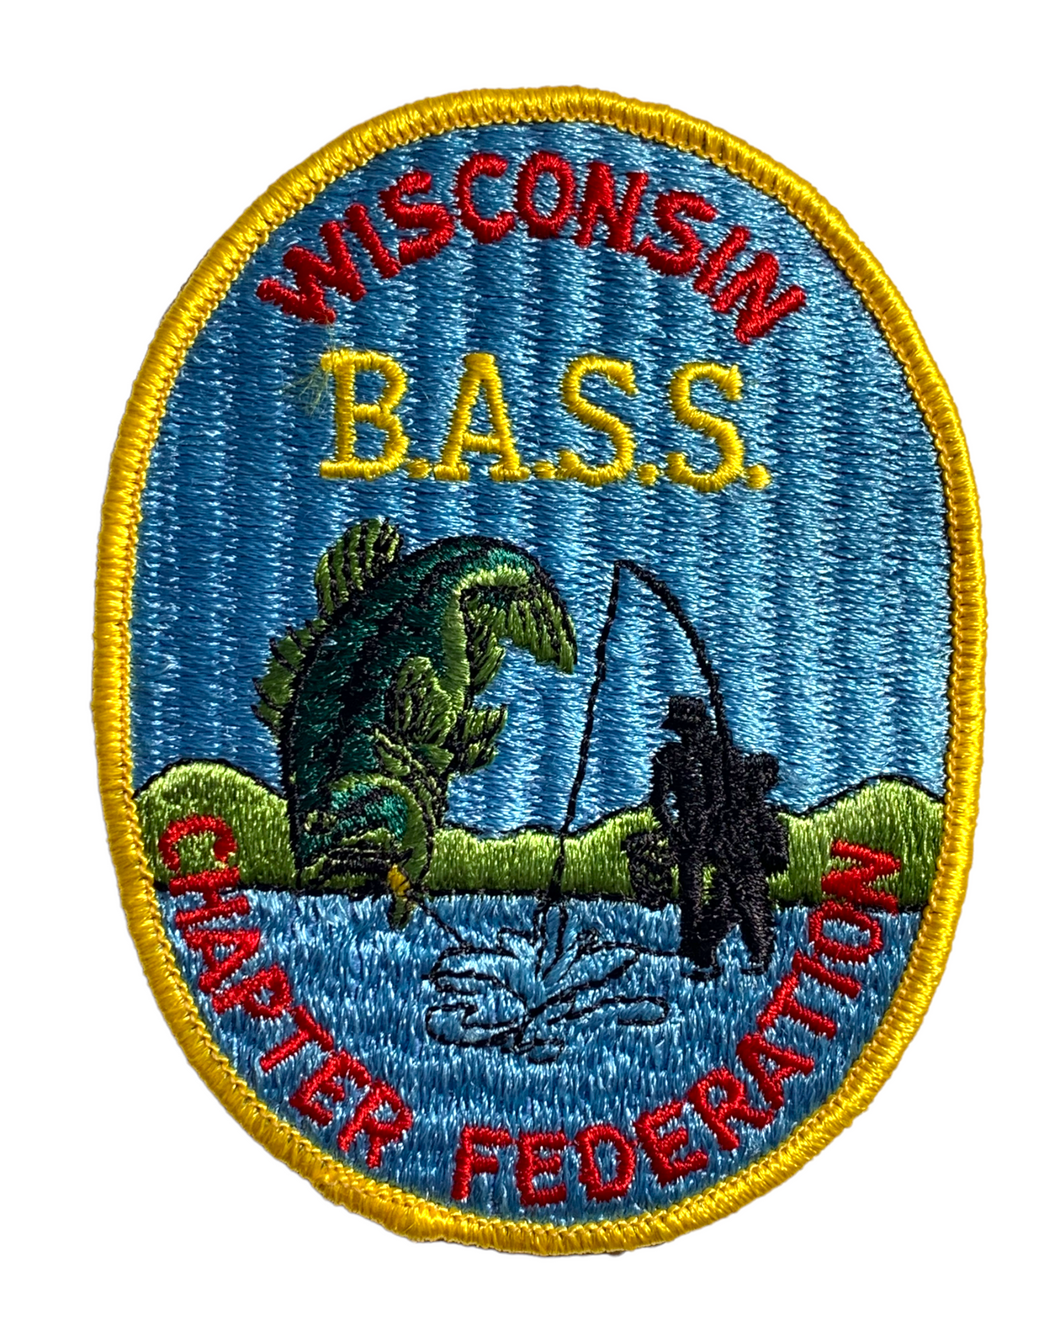 Front View of WISCONSIN B.A.S.S. (Bass Anglers Sportsman Society) CHAPTER FEDERATION PATCH